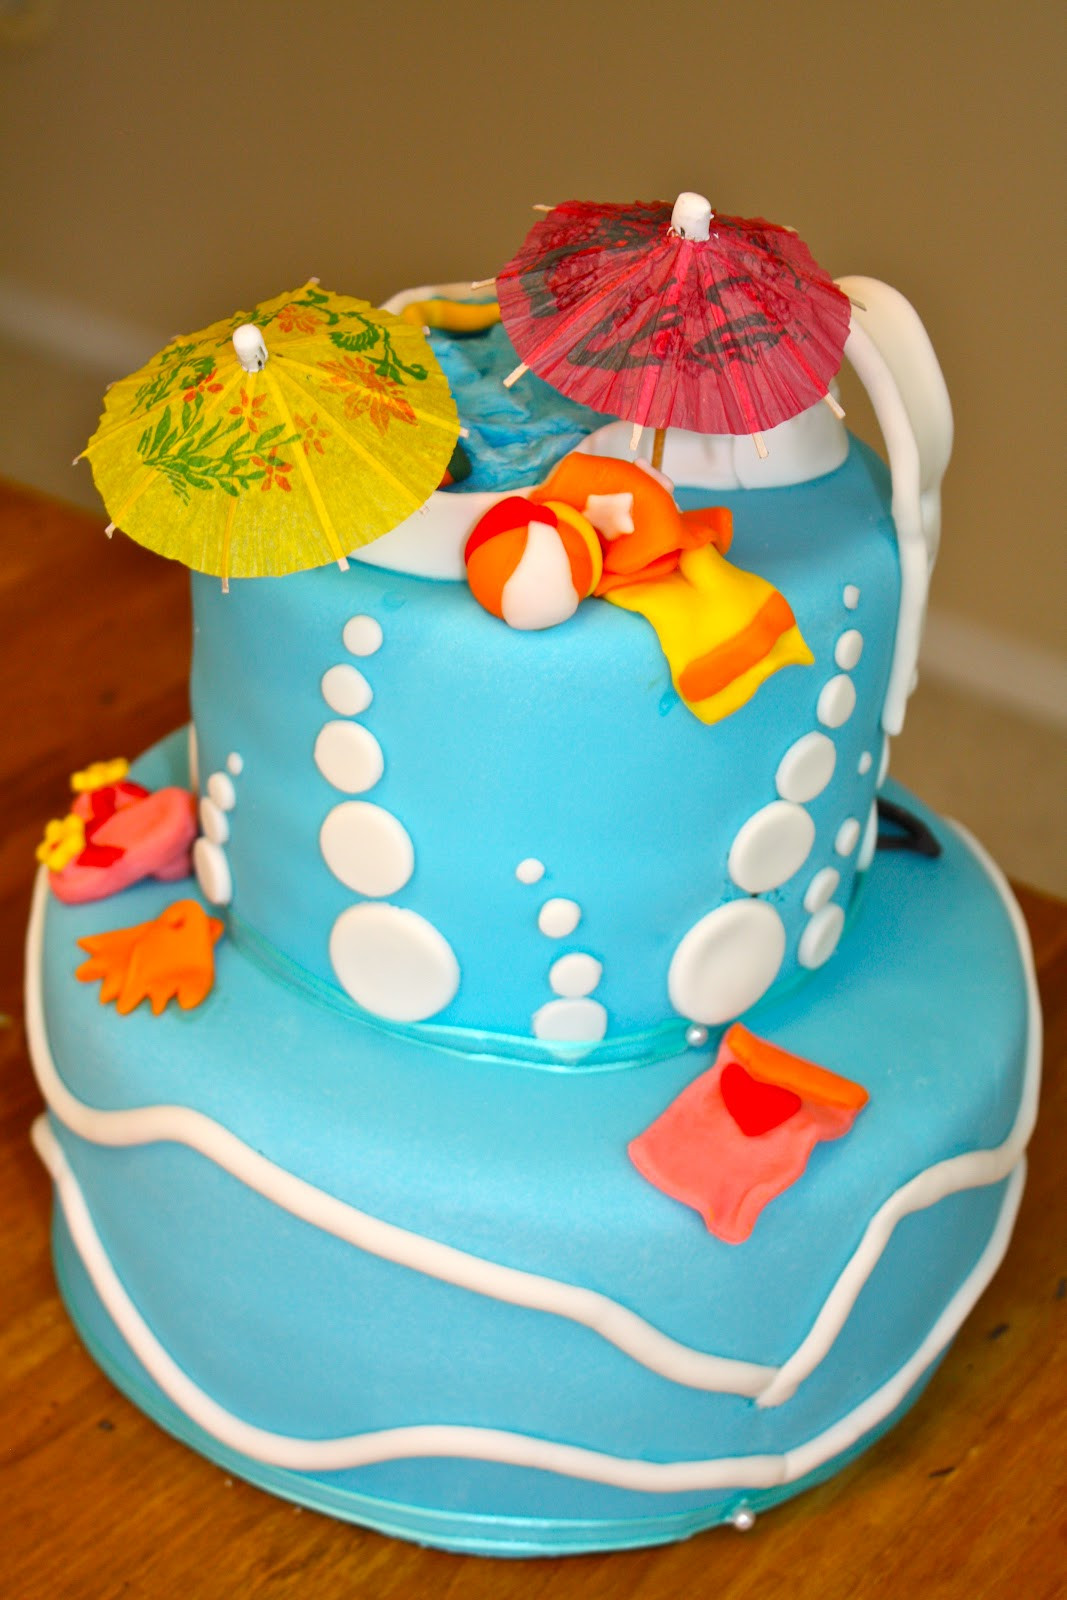 Pool Party Cake Ideas For Birthdays
 bumble cakes Summer Pool Party Birthday Cake